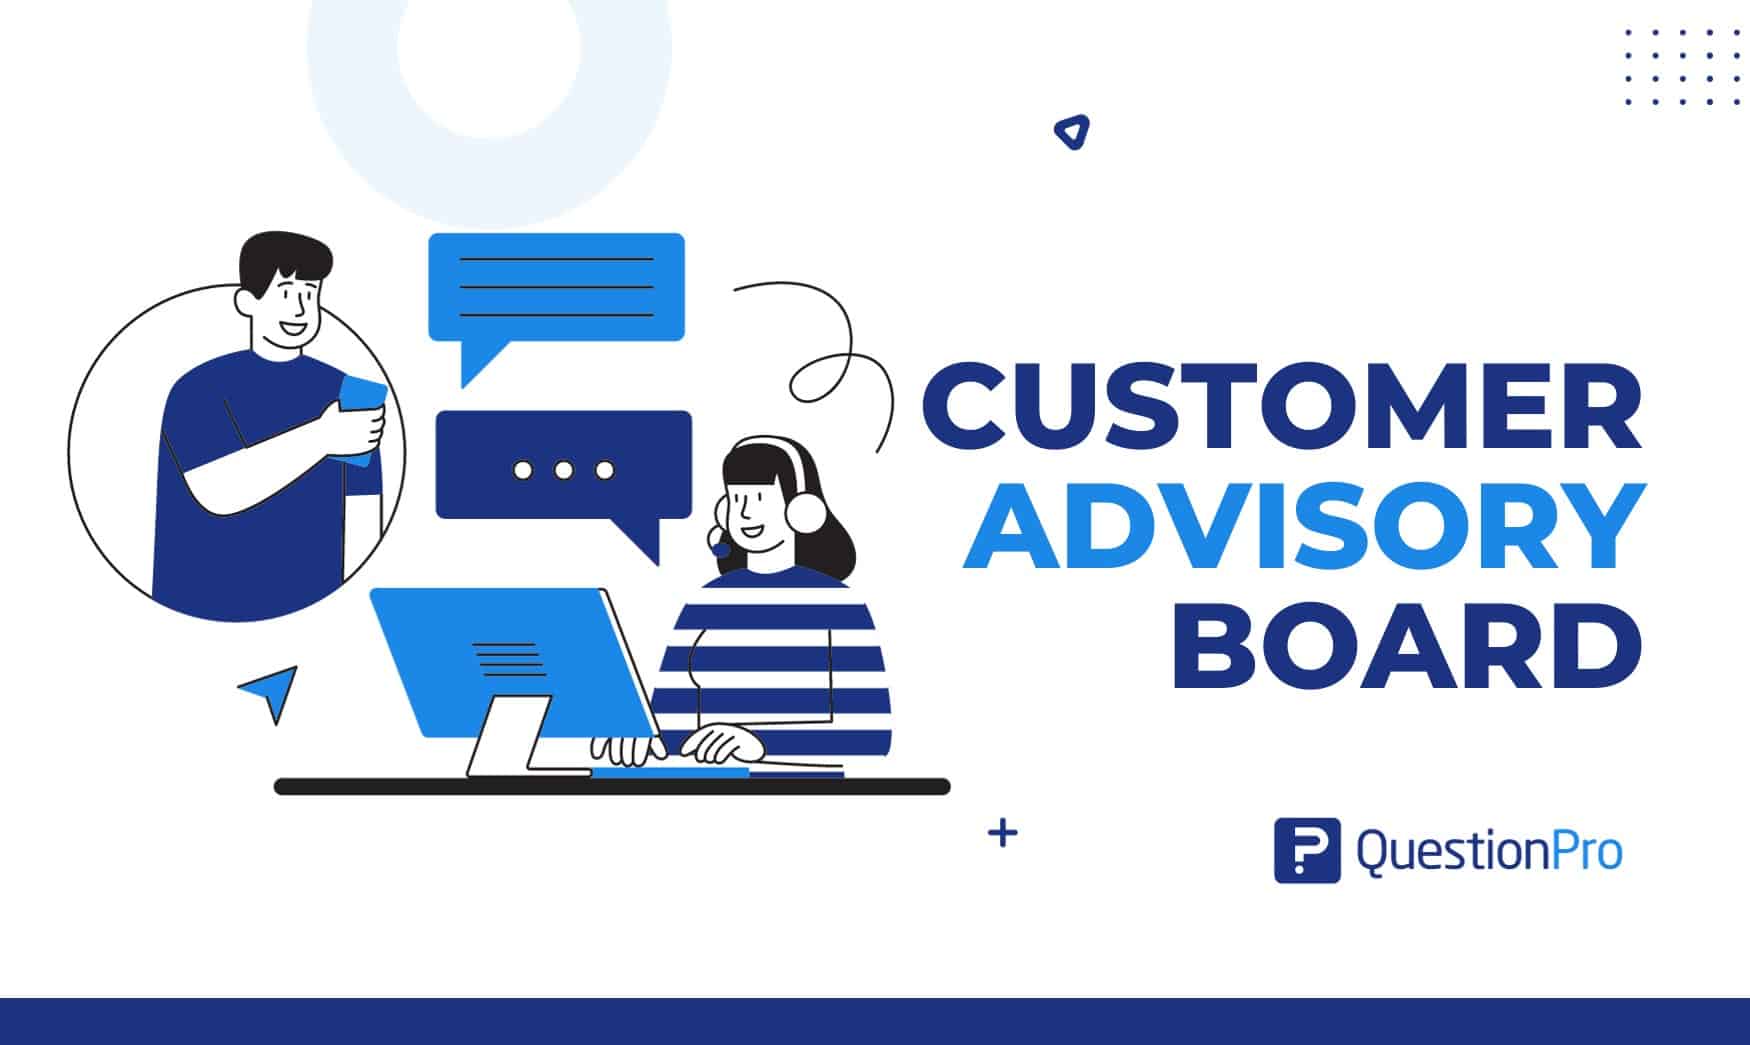 Customer Advisory Board: Definition, Tips & Best Practices